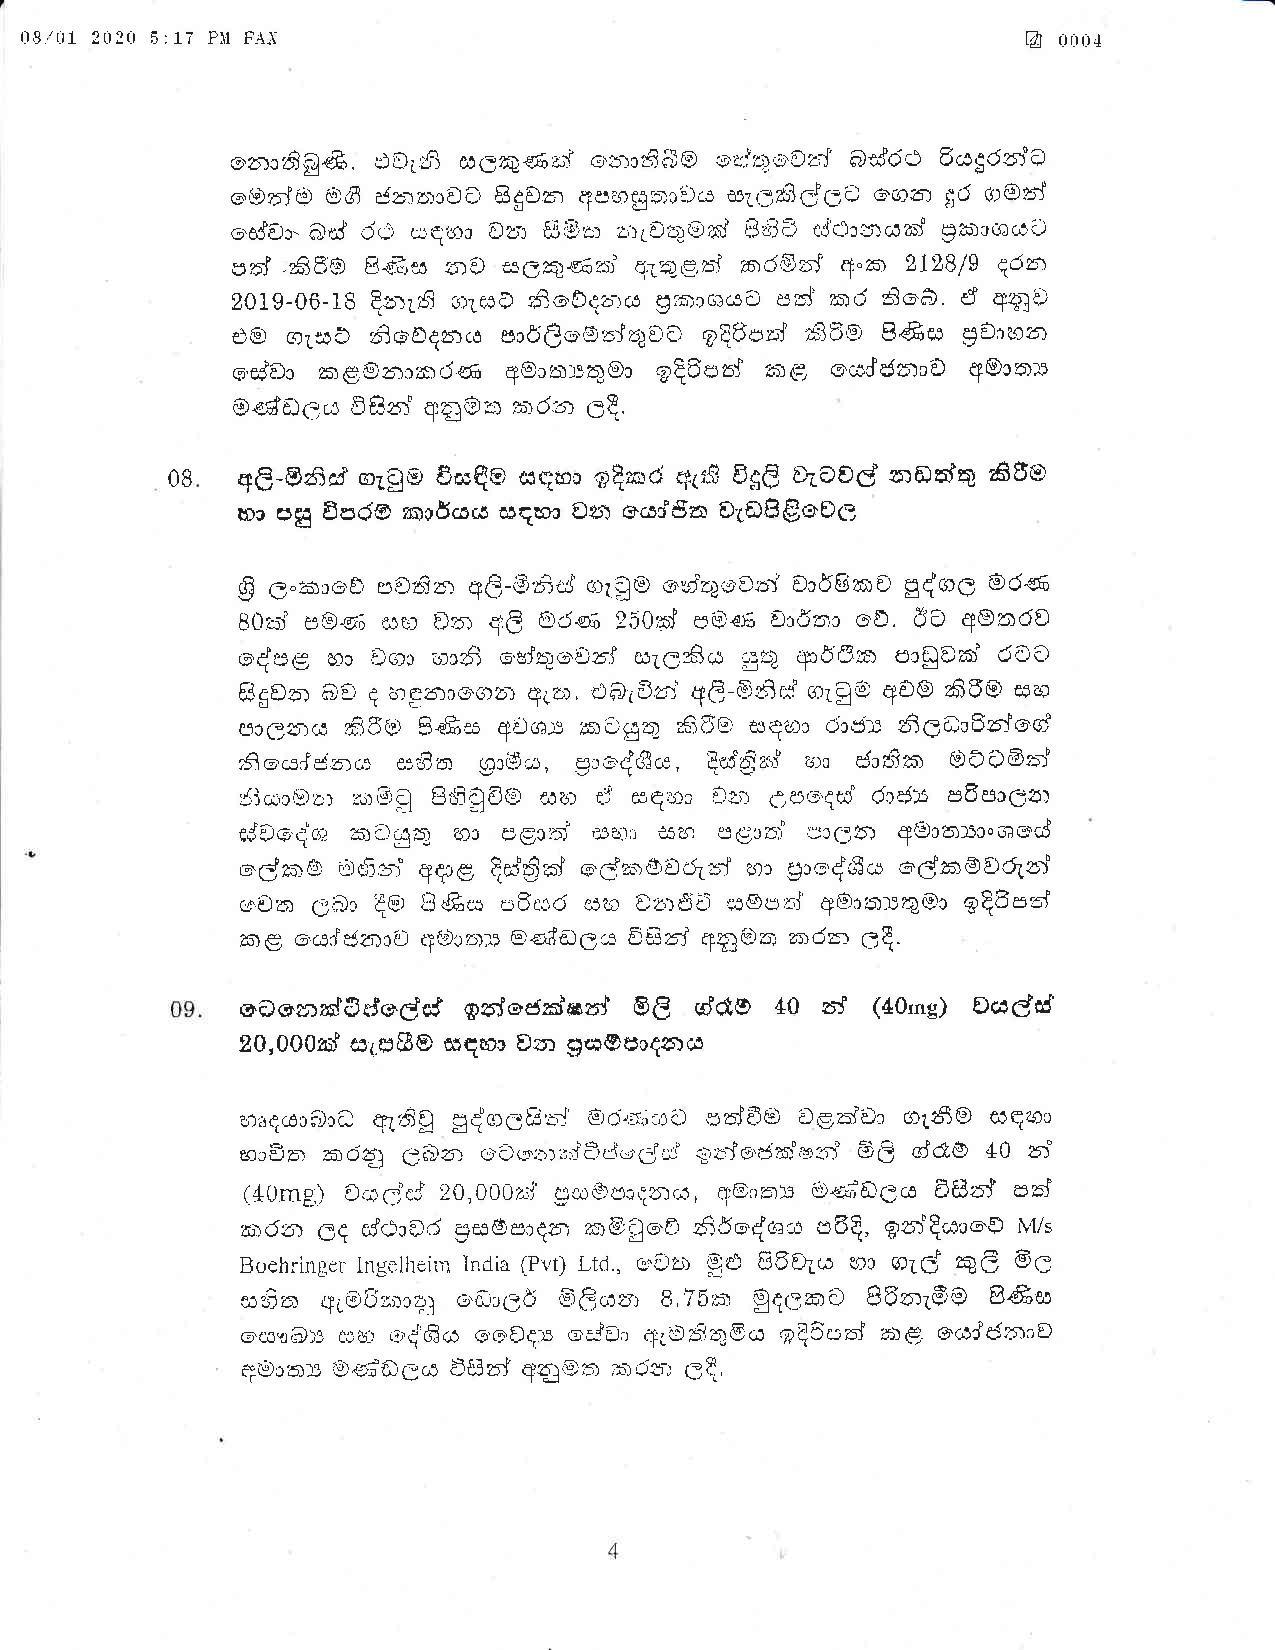 Cabinet Decision on 08.01.2020 page 004